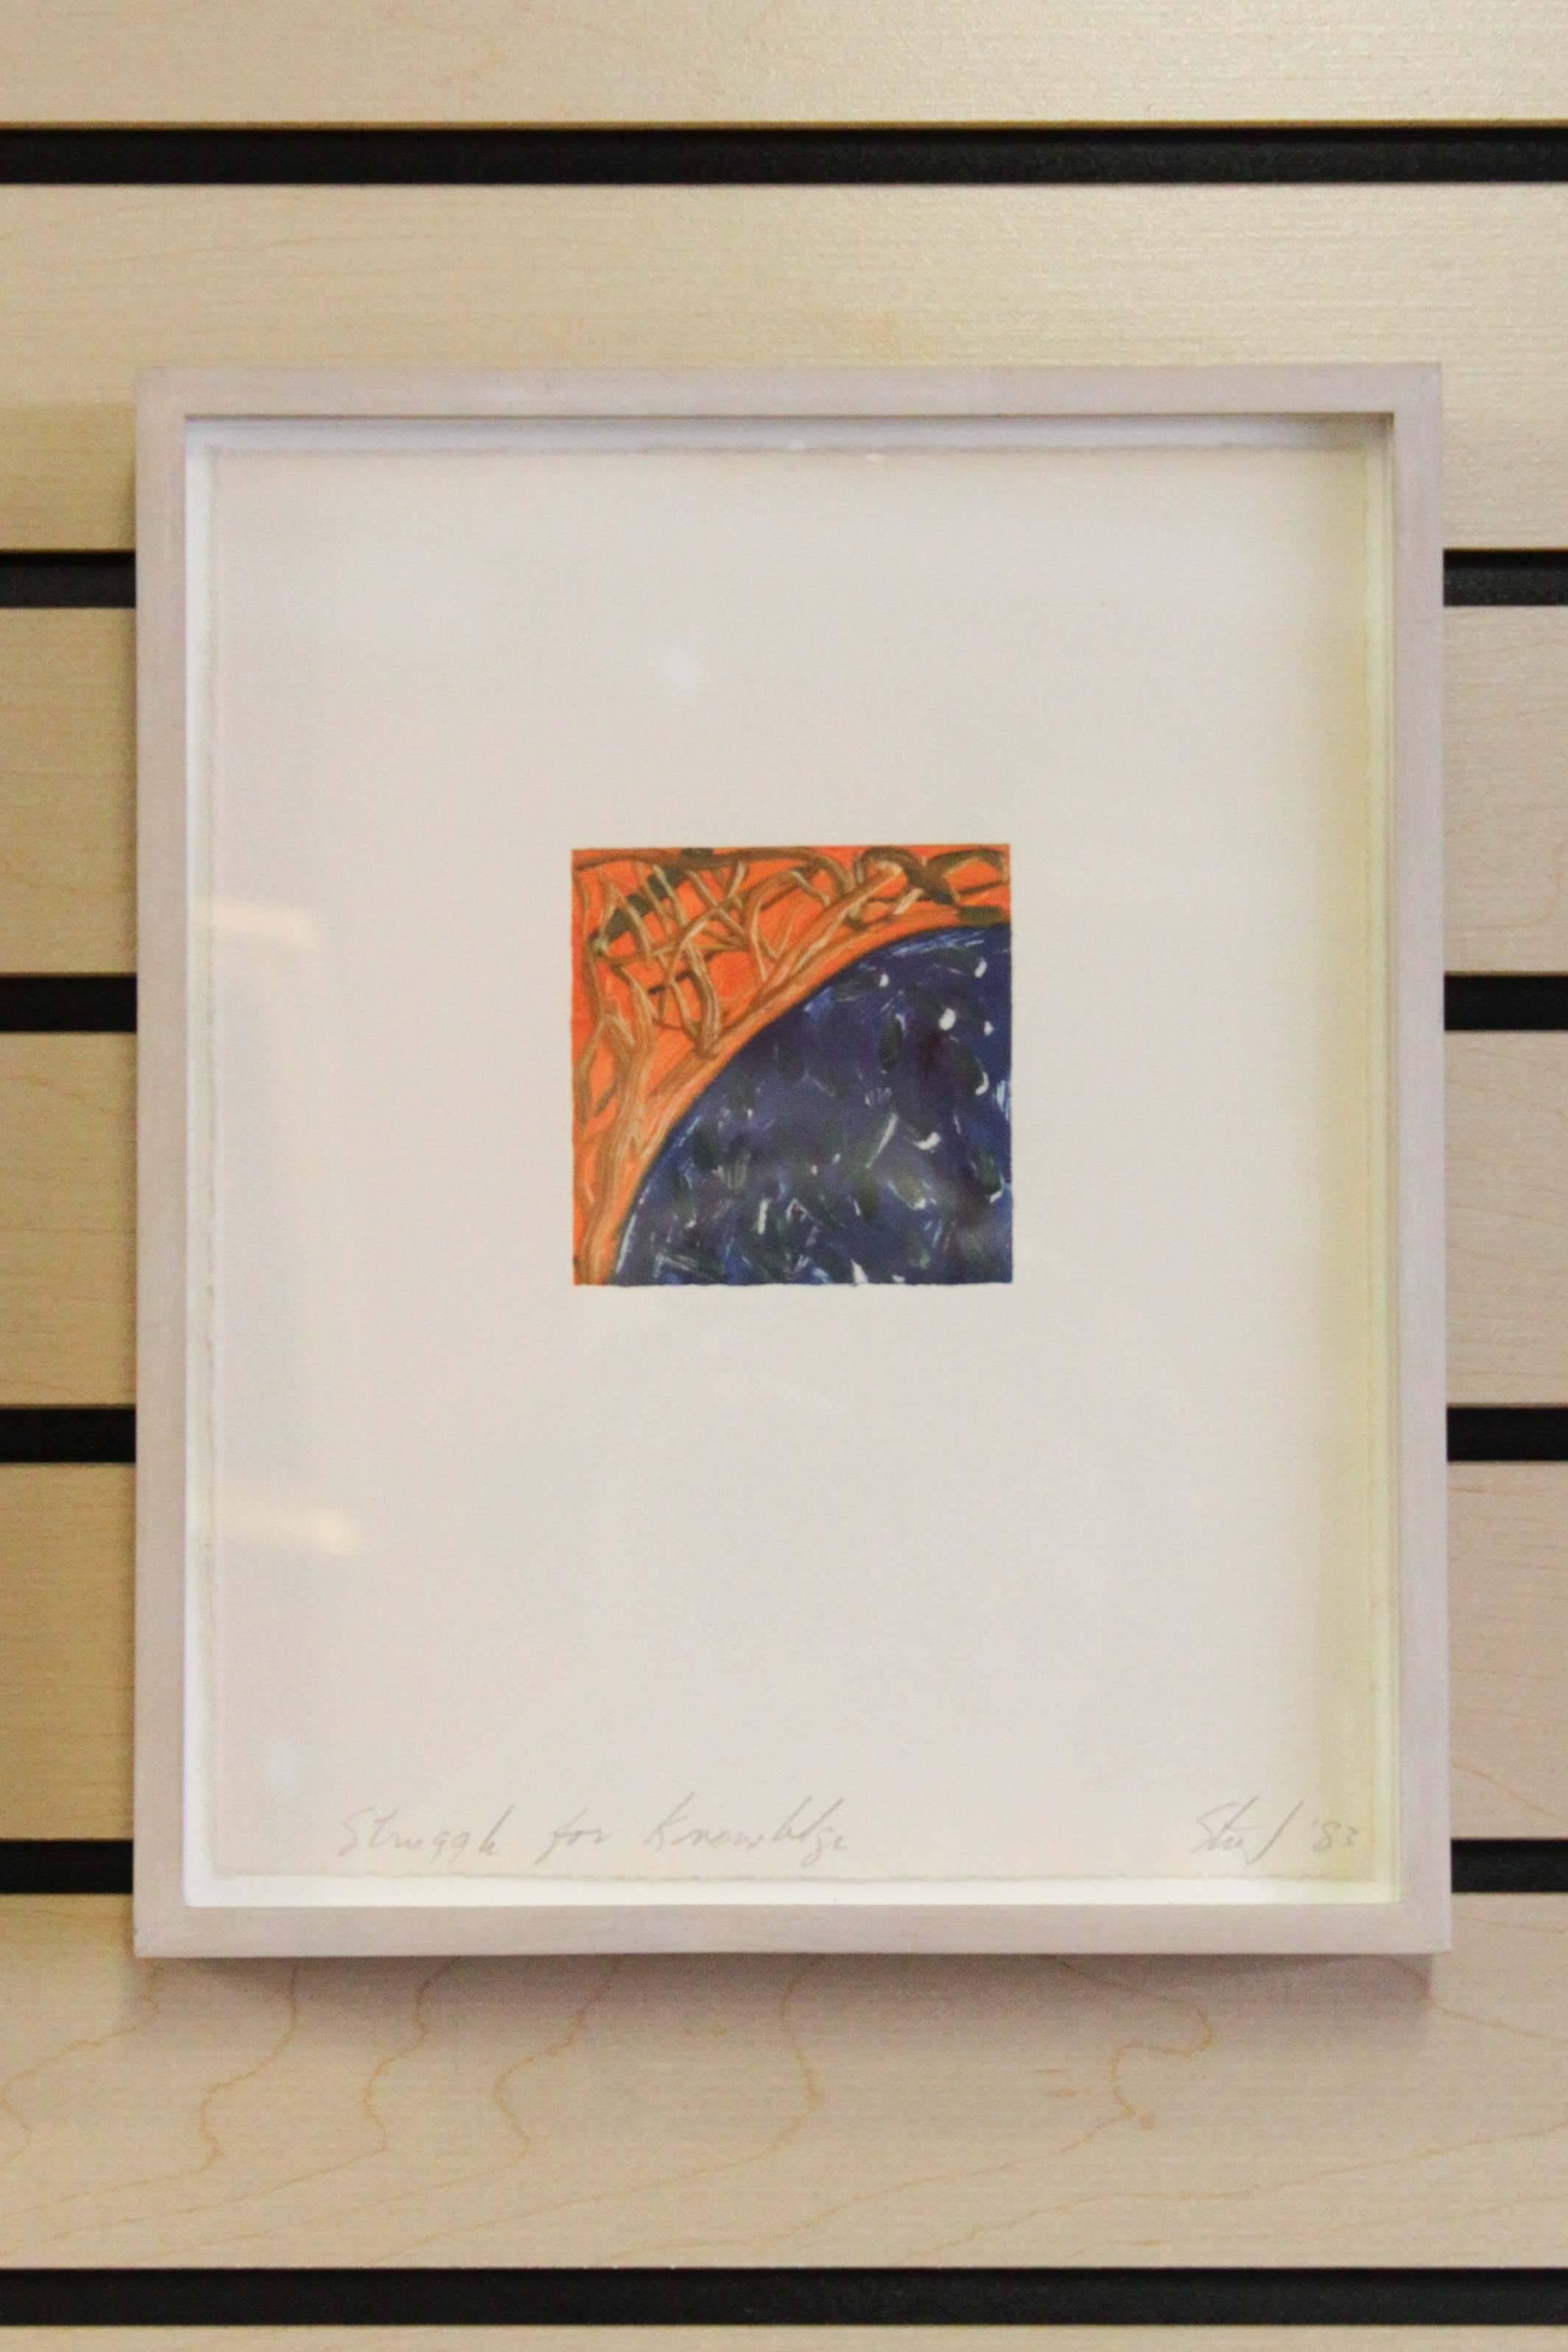 Pair of 20th century abstract paintings, titled in pencil "Strength for Knowledge" and "Struggle for Knowledge". Framed and signed "Stu '83".